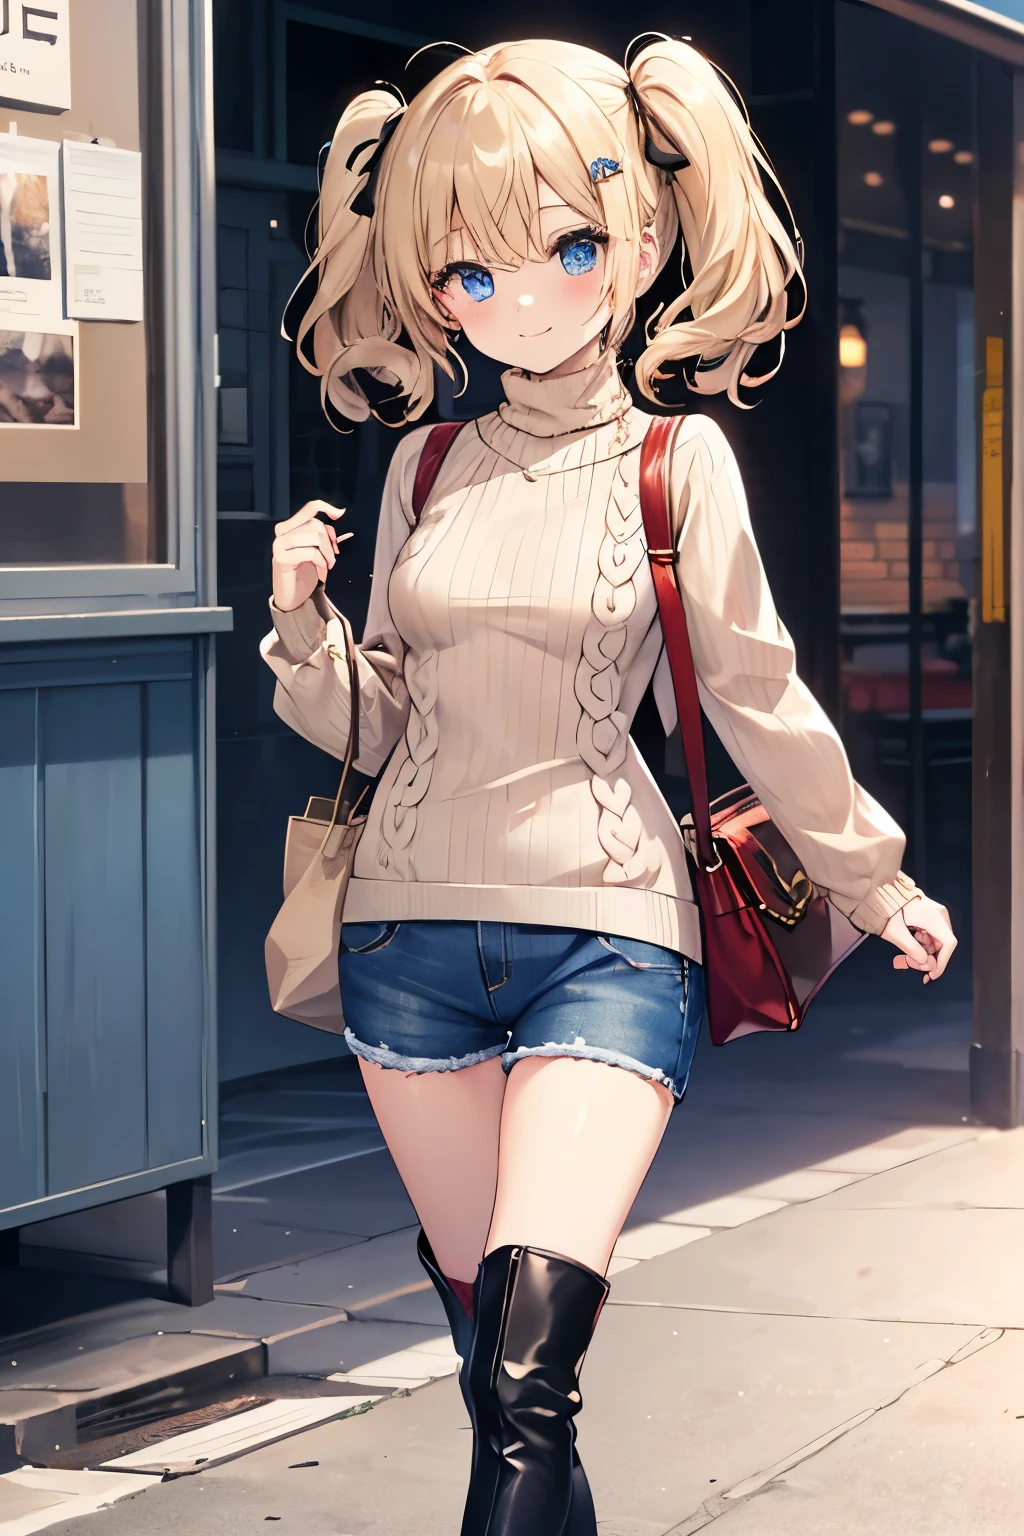 Blonde、Blue Eyes、girl、Small breasts、Twin tails、girl、Small breasts、Lolita、Bright smile、Looks about 15 years old、Petan Musume、short、目のhighlight、Sexy thighs、Walking Outside、blue sky、(Long knit sweater with beige high neck:1.4), ,(Blue jeans fabric shorts),(Black boots)、(Small Black Enamel Bag)、Your eyes are so beautiful、highlight